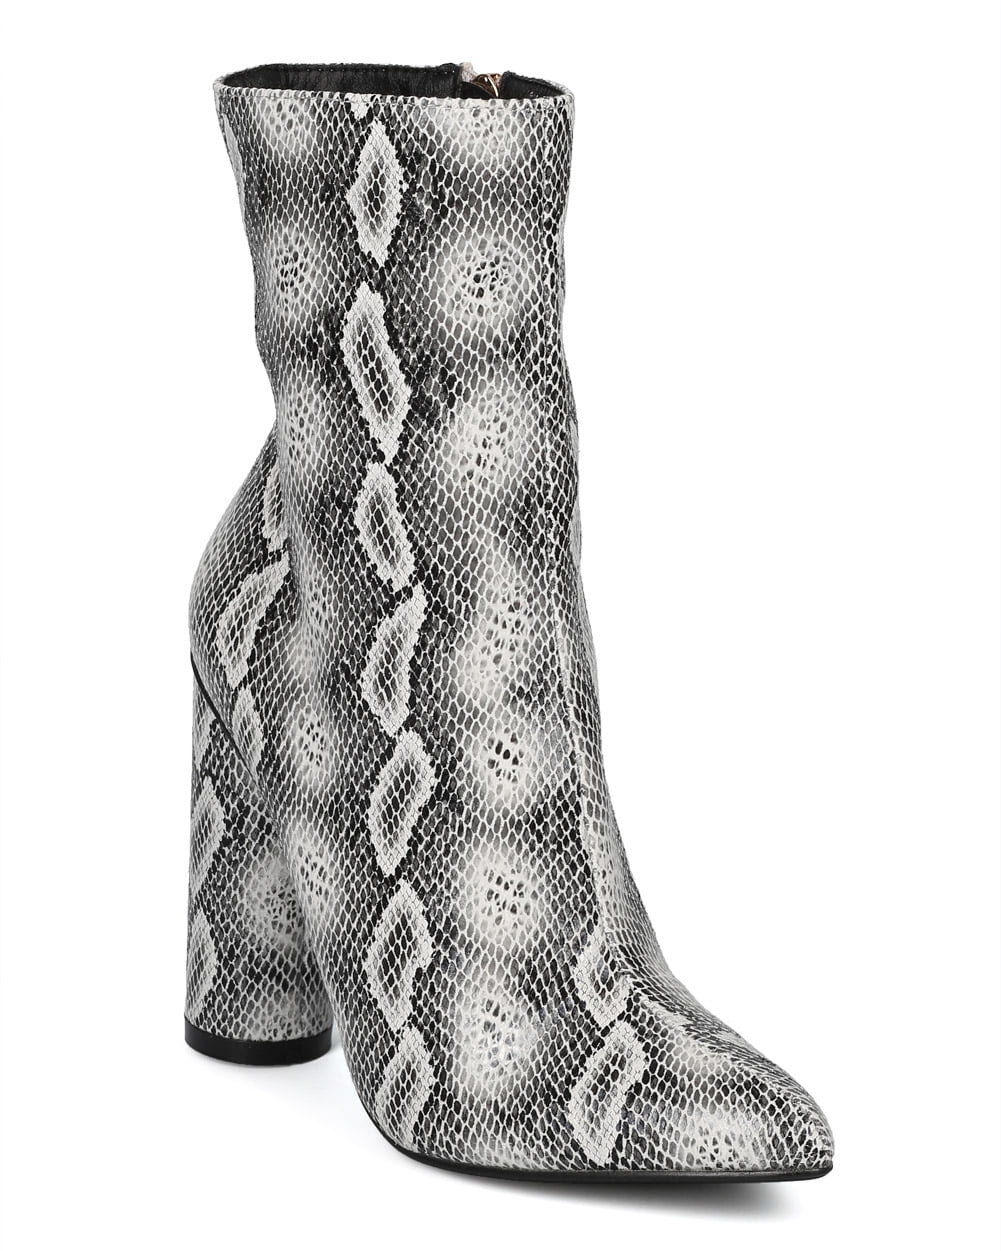 snakeskin pointy boots